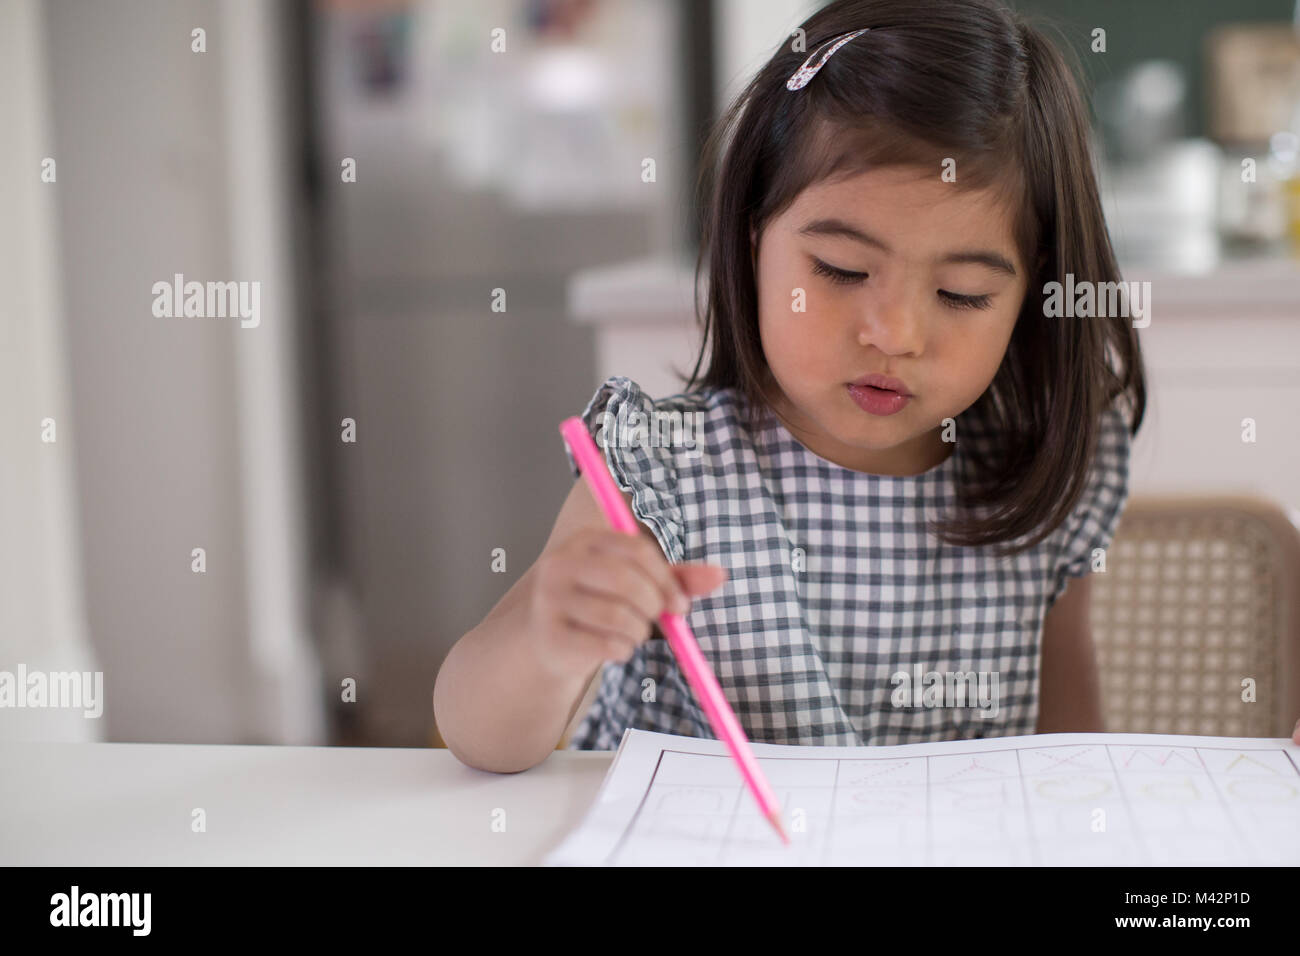 Girl learning how to write Stock Photo